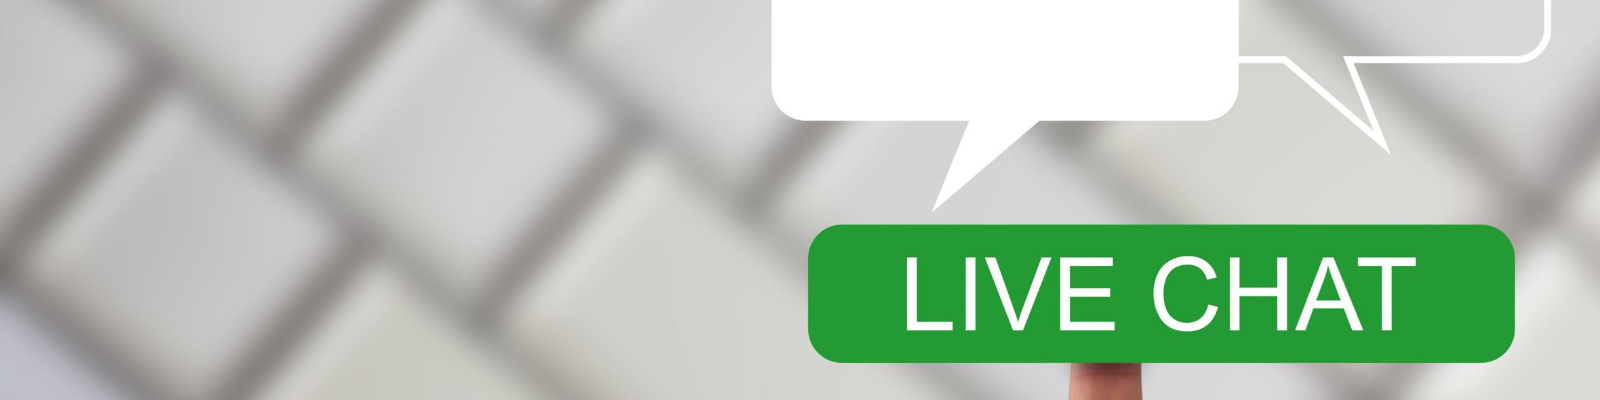 Benefits of live chat in your ecommerce website